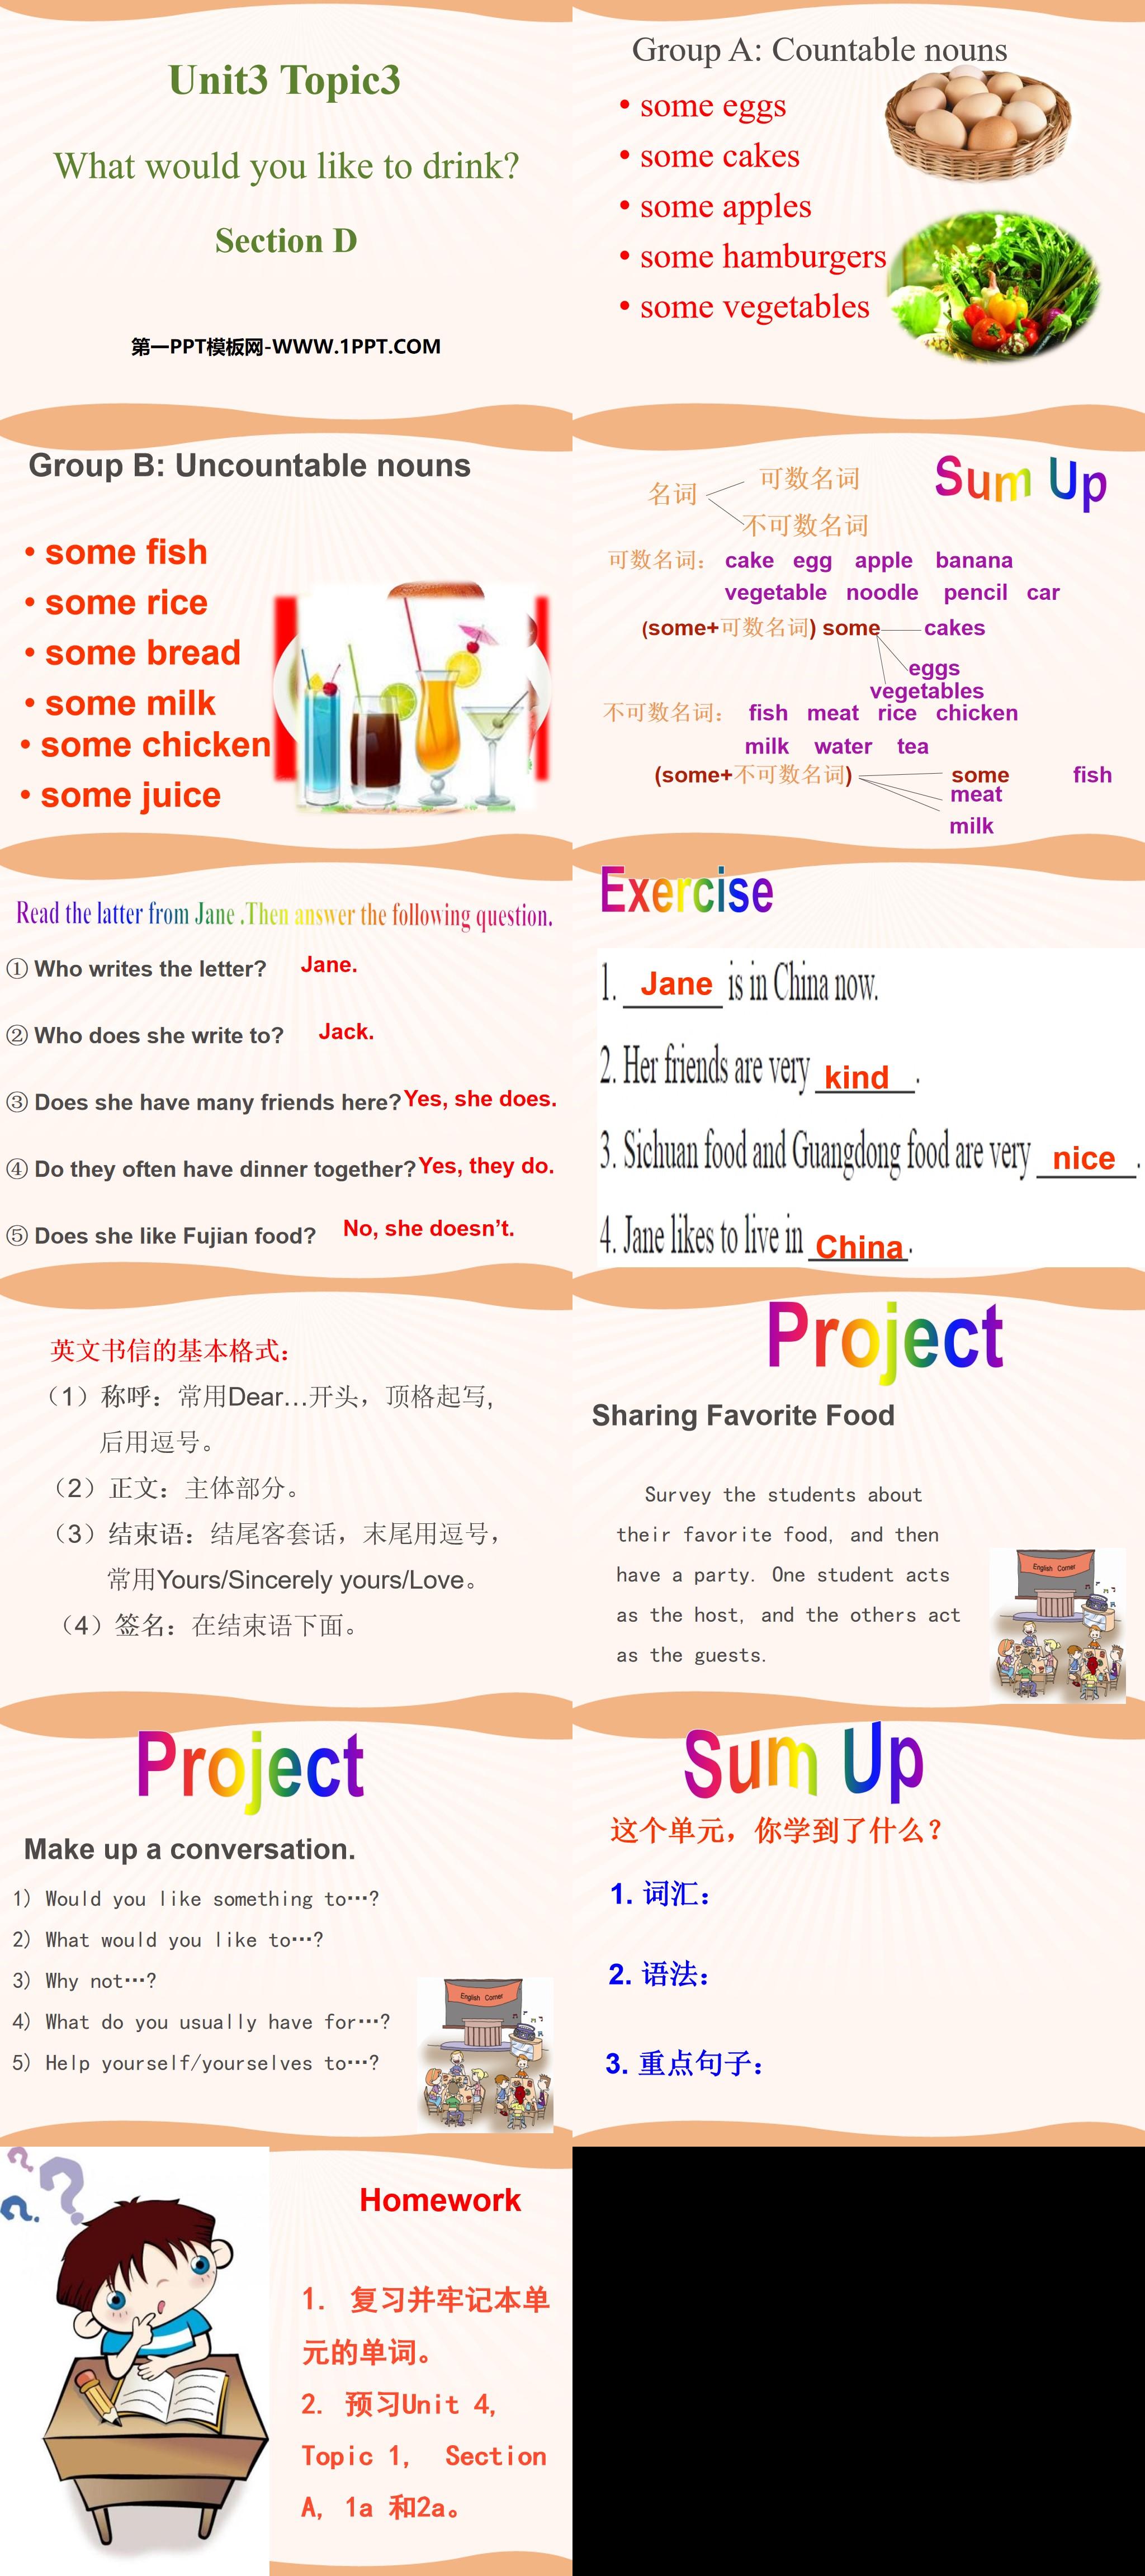 《What would you like to drink?》SectionD PPT
（2）